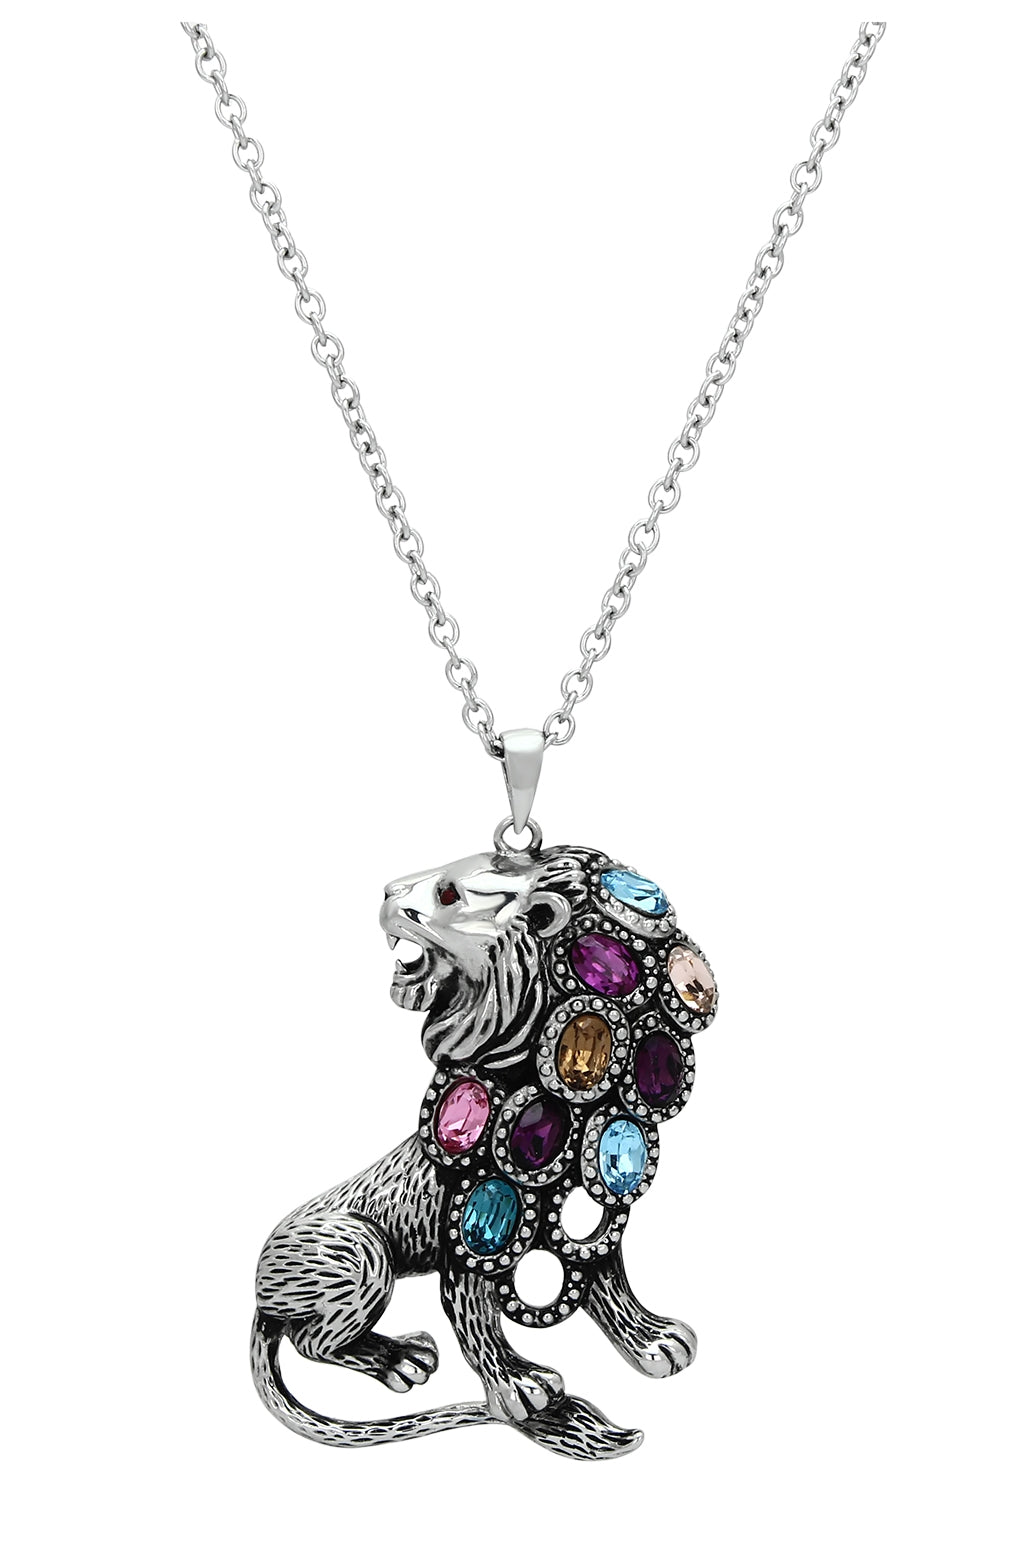 CJG2288 Wholesale Stainless Steel Top Grade Crystal Chain Lion Pendant